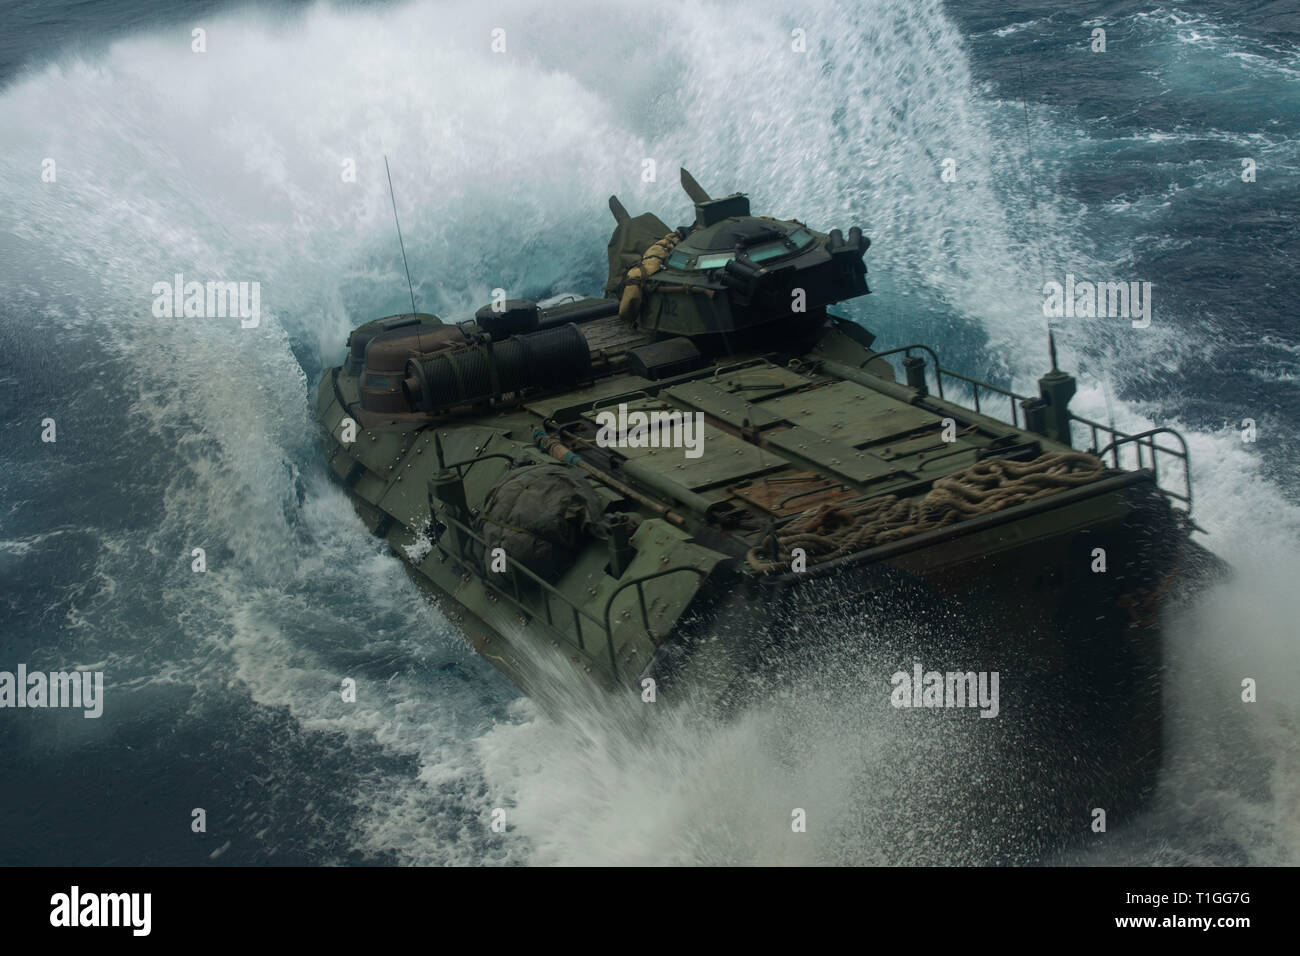 An Assault Amphibious Vehicle with Battalion Landing Team, 1st Battalion, 4th Marines, splashes into the water off the amphibious transport dock USS Green Bay (LPD 20), underway in the Pacific Ocean, March 24, 2019. BLT 1/4 is the Ground Combat Element for the 31st Marine Expeditionary Unit. The 31st MEU, the Marine Corps’ only continuously forward-deployed MEU, provides a flexible and lethal force ready to perform a wide range of military operations as the premier crisis response force in the Indo-Pacific region. (Official Marine Corps photo by Lance Cpl. Cameron E. Parks /Released) Stock Photo